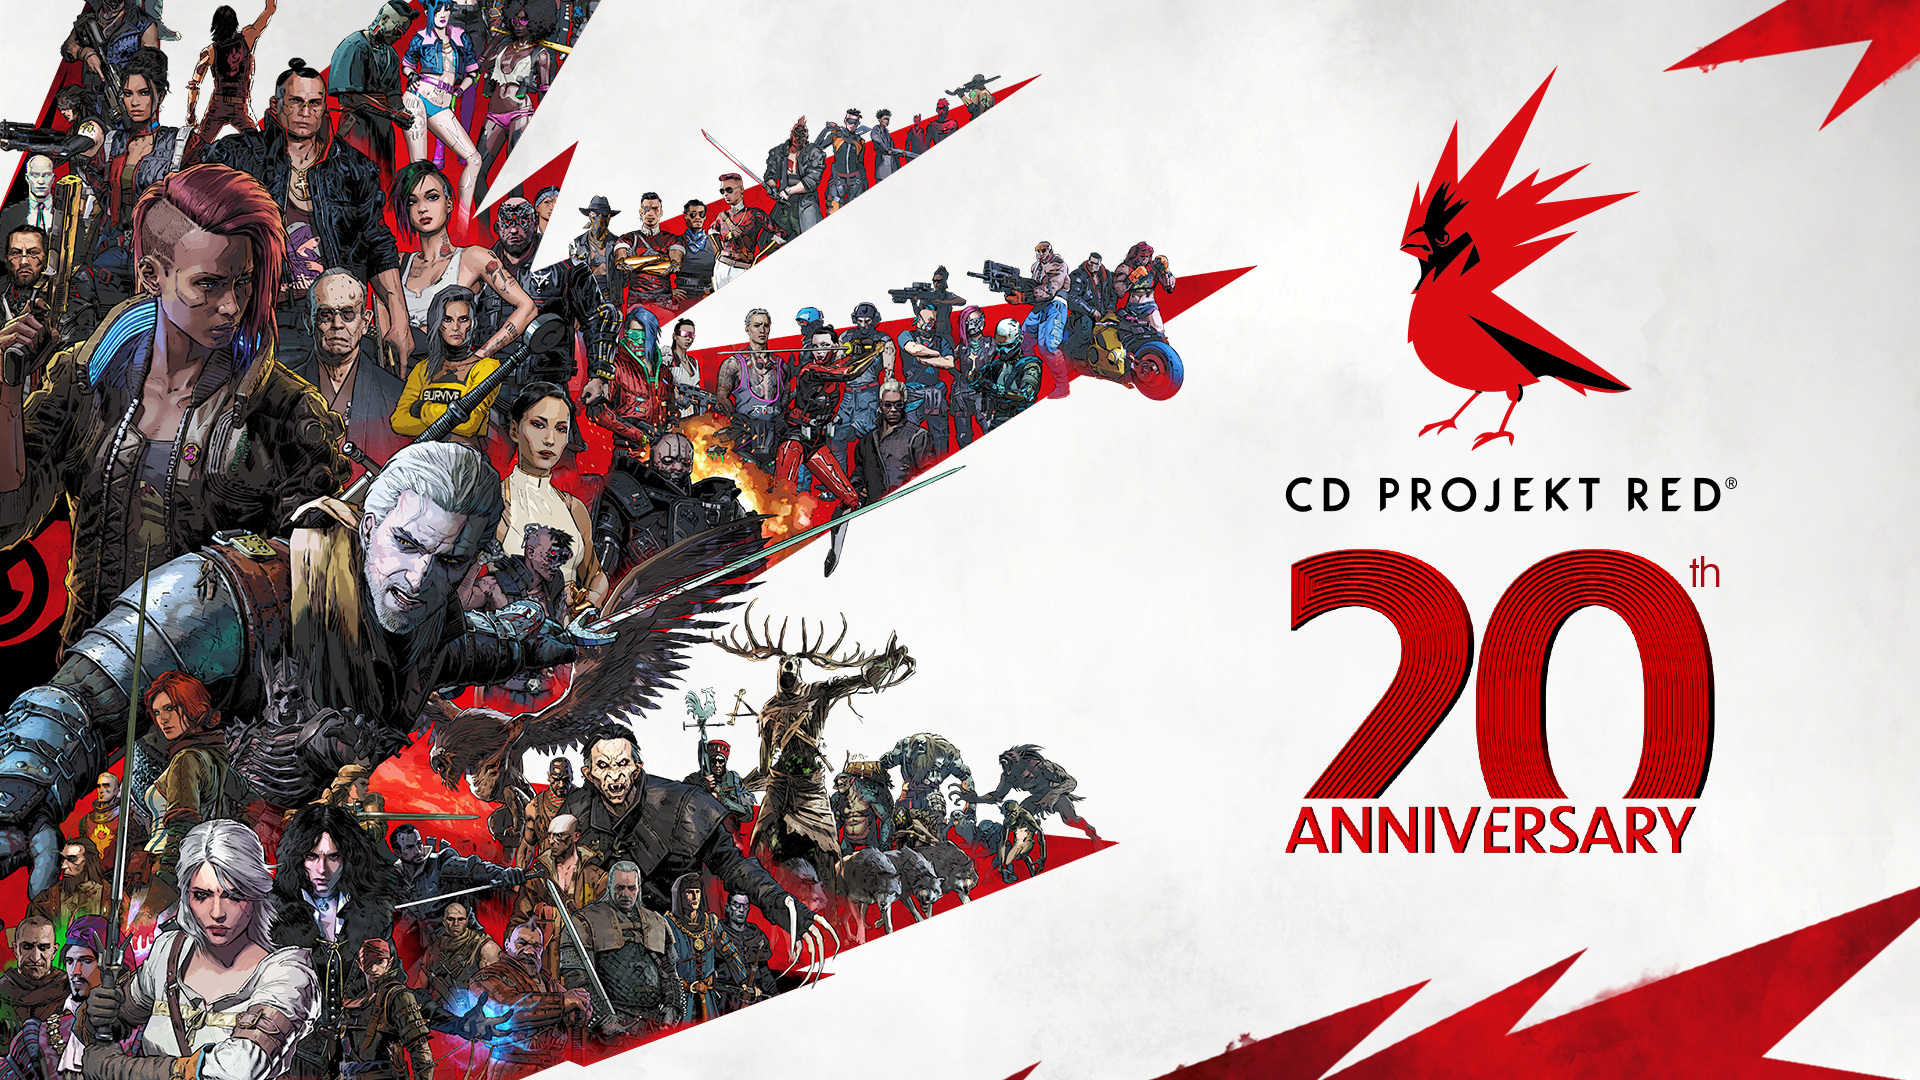 CD Projekt RED started developing its next-gen RED Engine tech in 2015